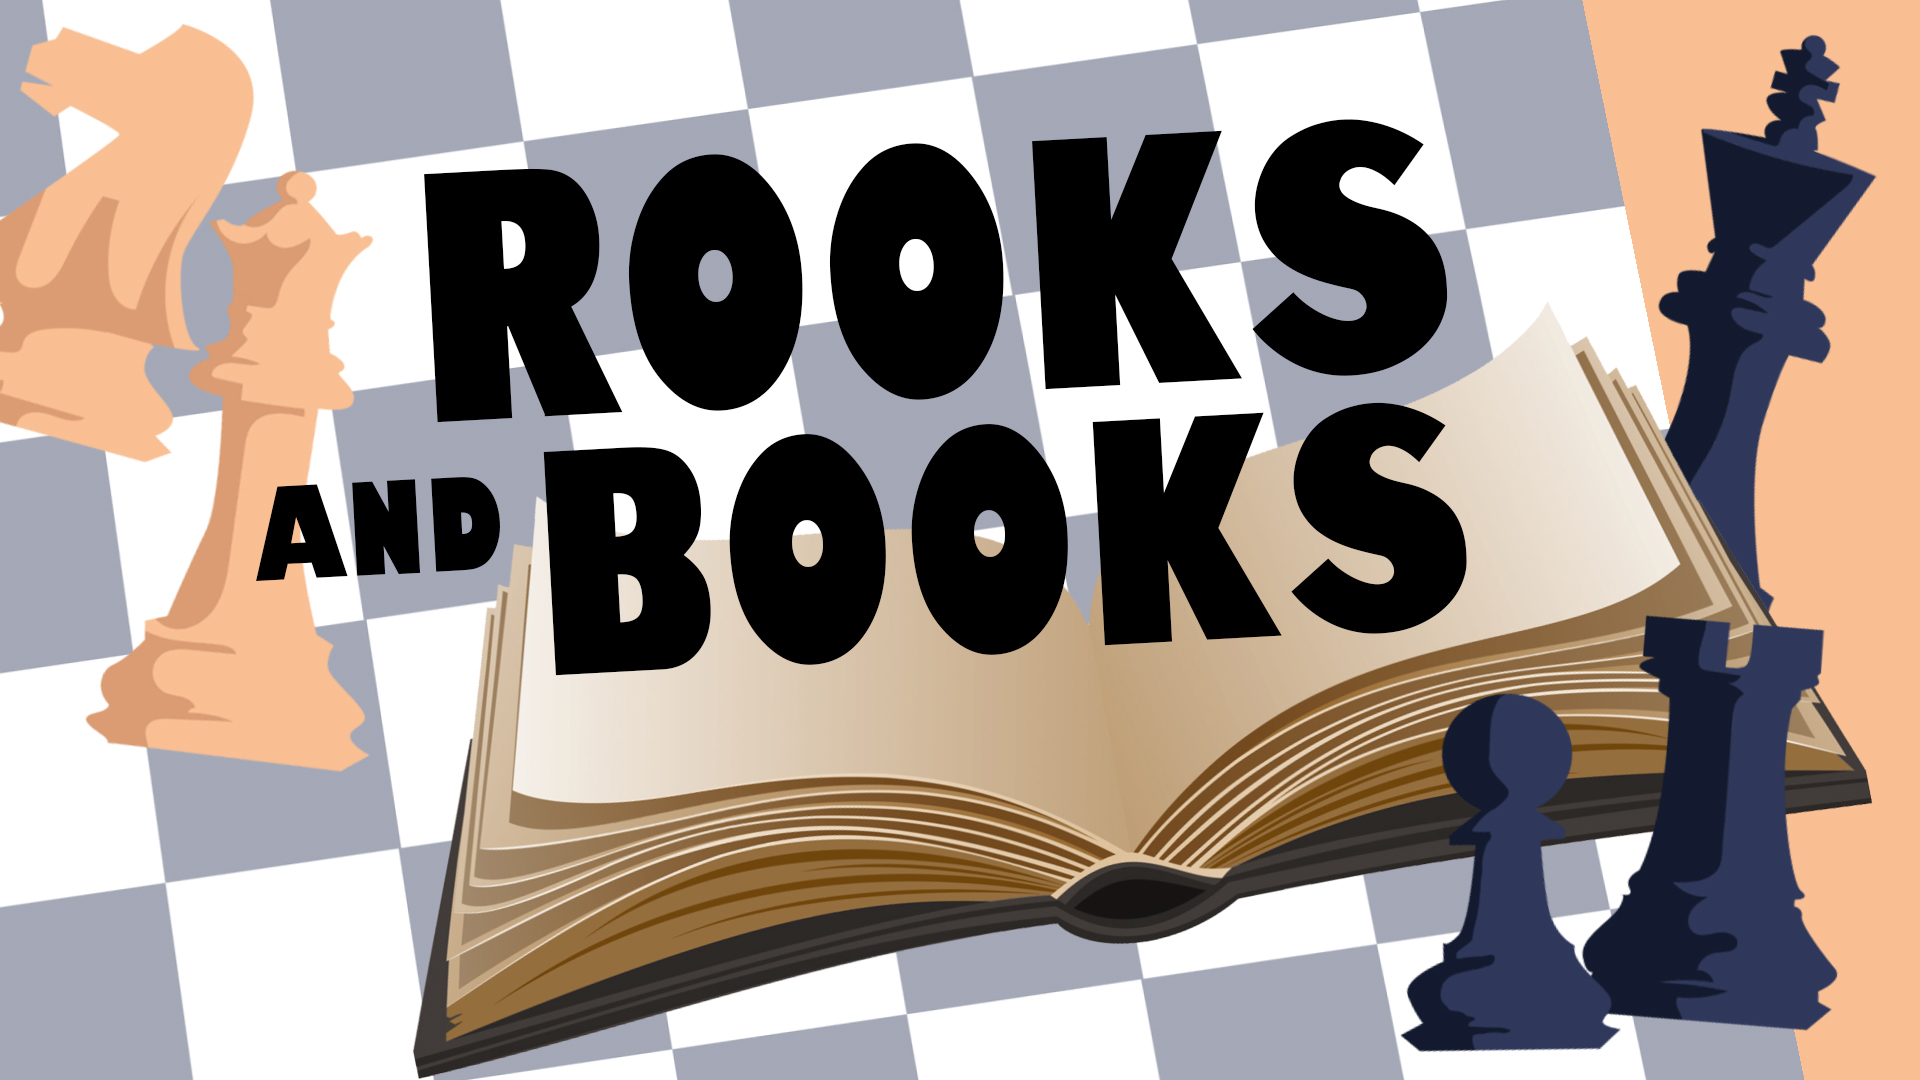 Image reads "Rooks and Books" against a checkerboard background. A book is behind the title and chess pieces are scattered around the design. 